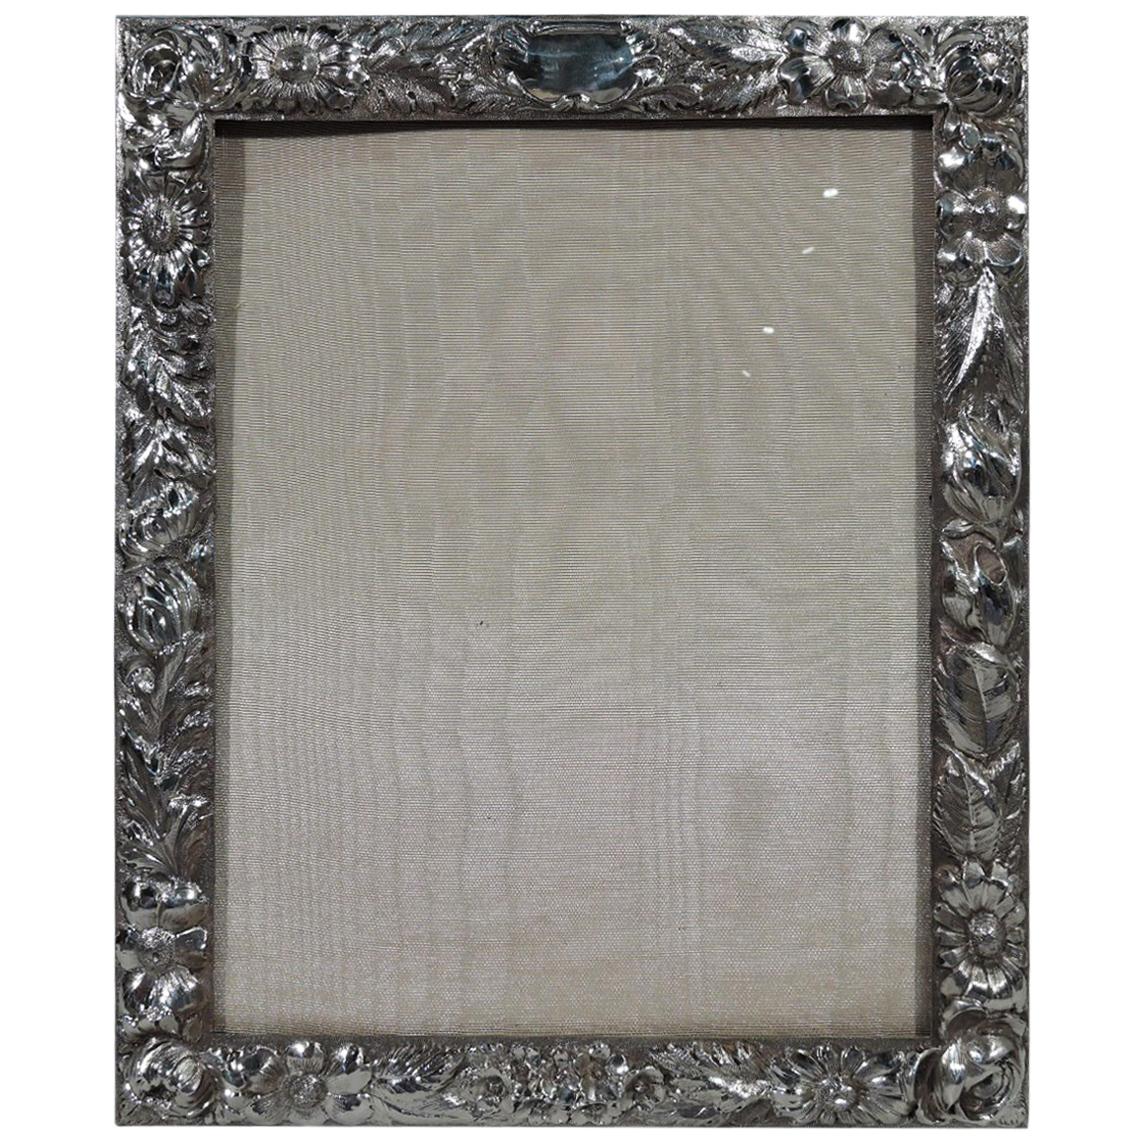 Antique Repoussé Sterling Silver Picture Frame by Stieff of Baltimore